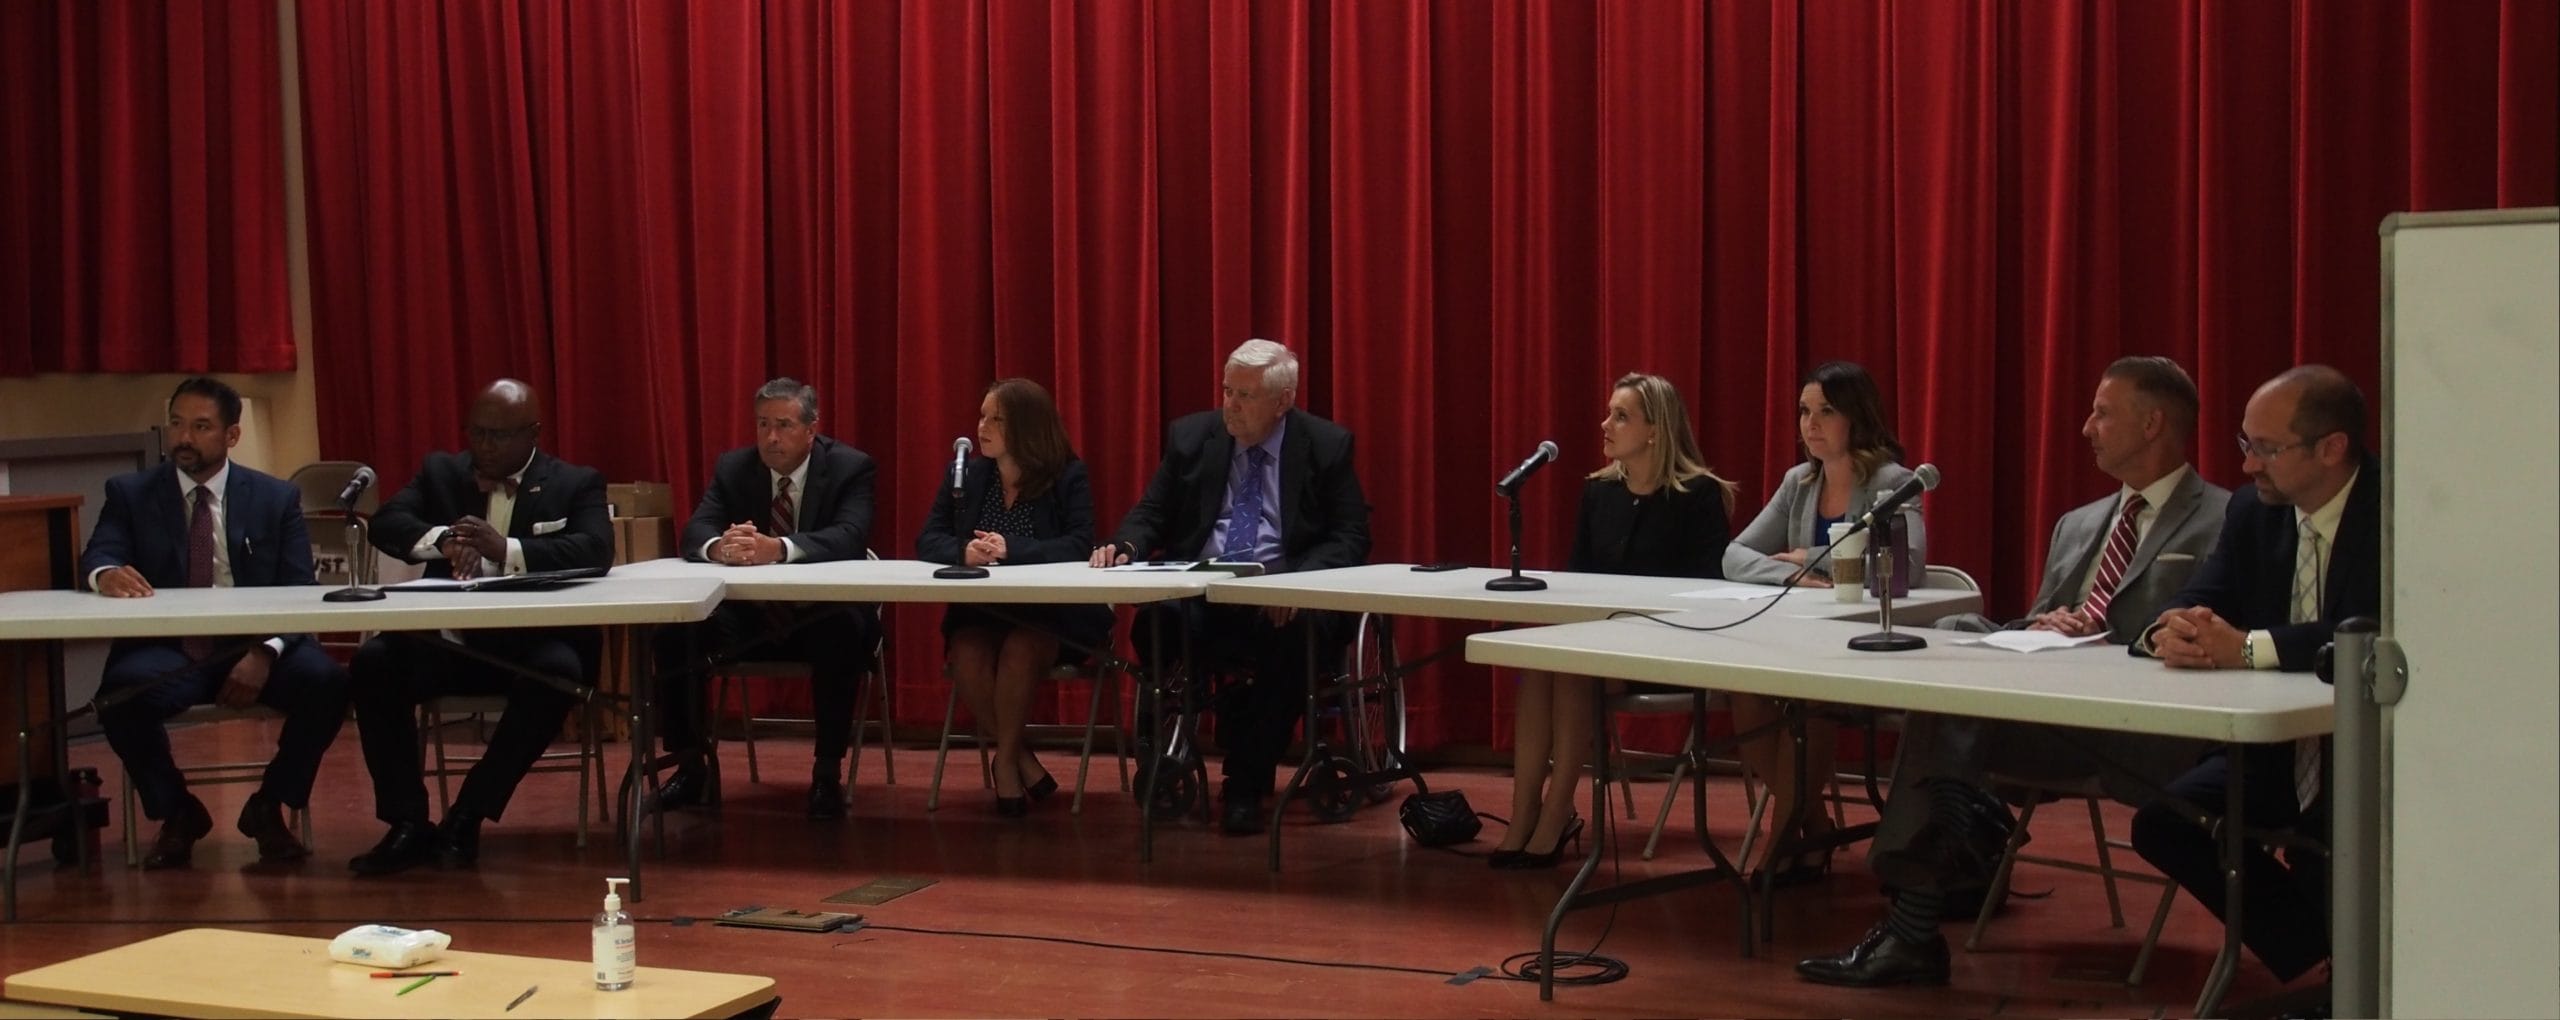 VIDEO: Riverside judge candidates state their cases for election